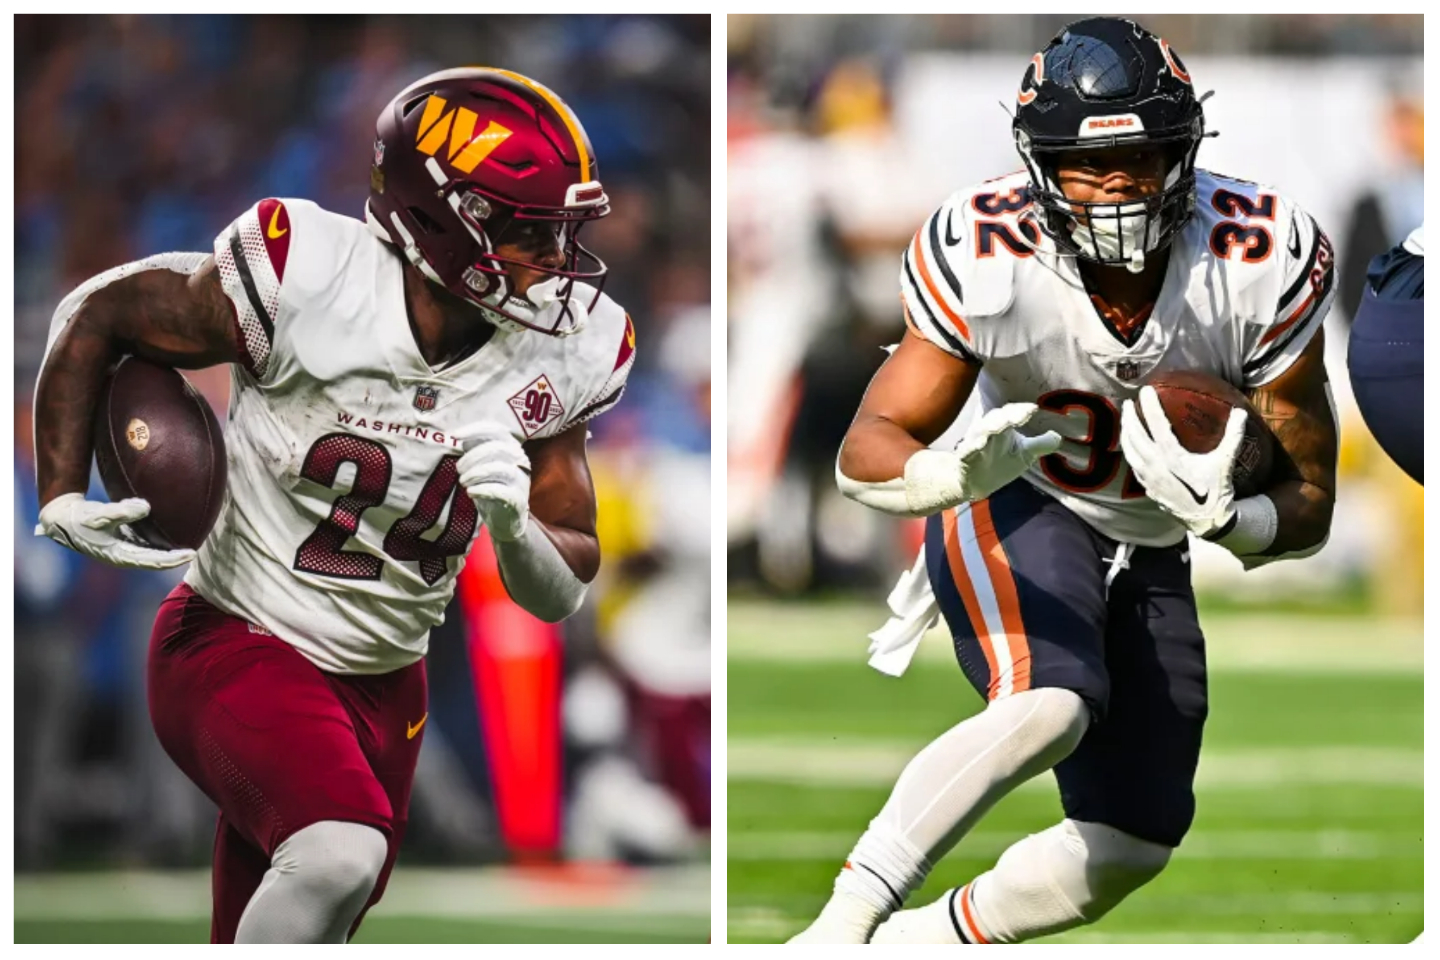 Washington Commanders against the Chicago Bears at Soldier Field. - chicagobears.com | commanders.com